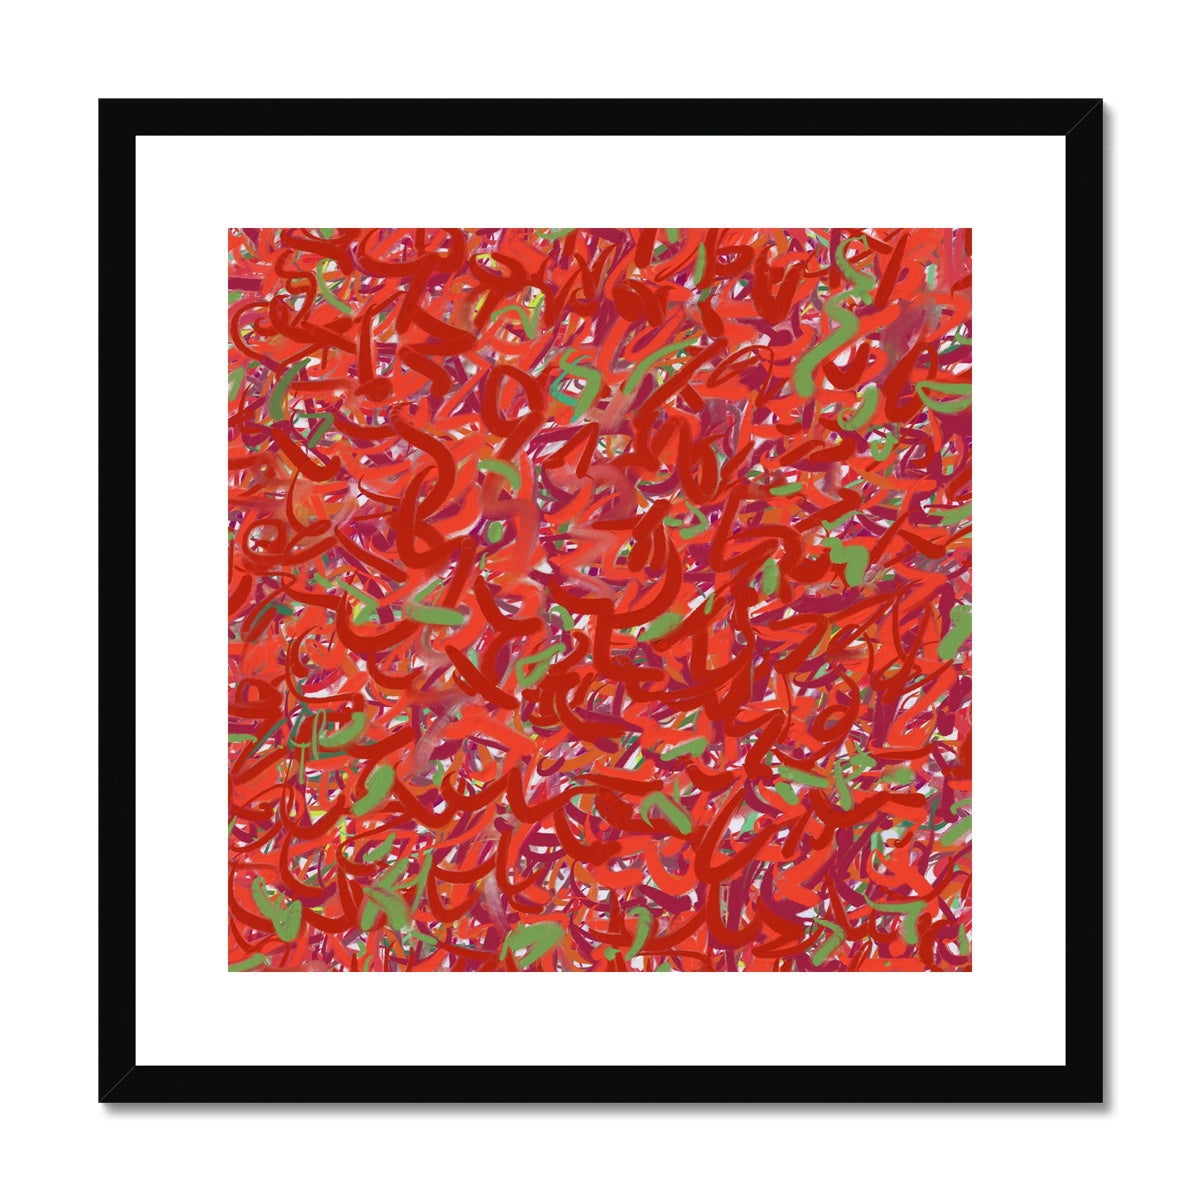 Deep reds and splashes of green in a black frame with white mount.